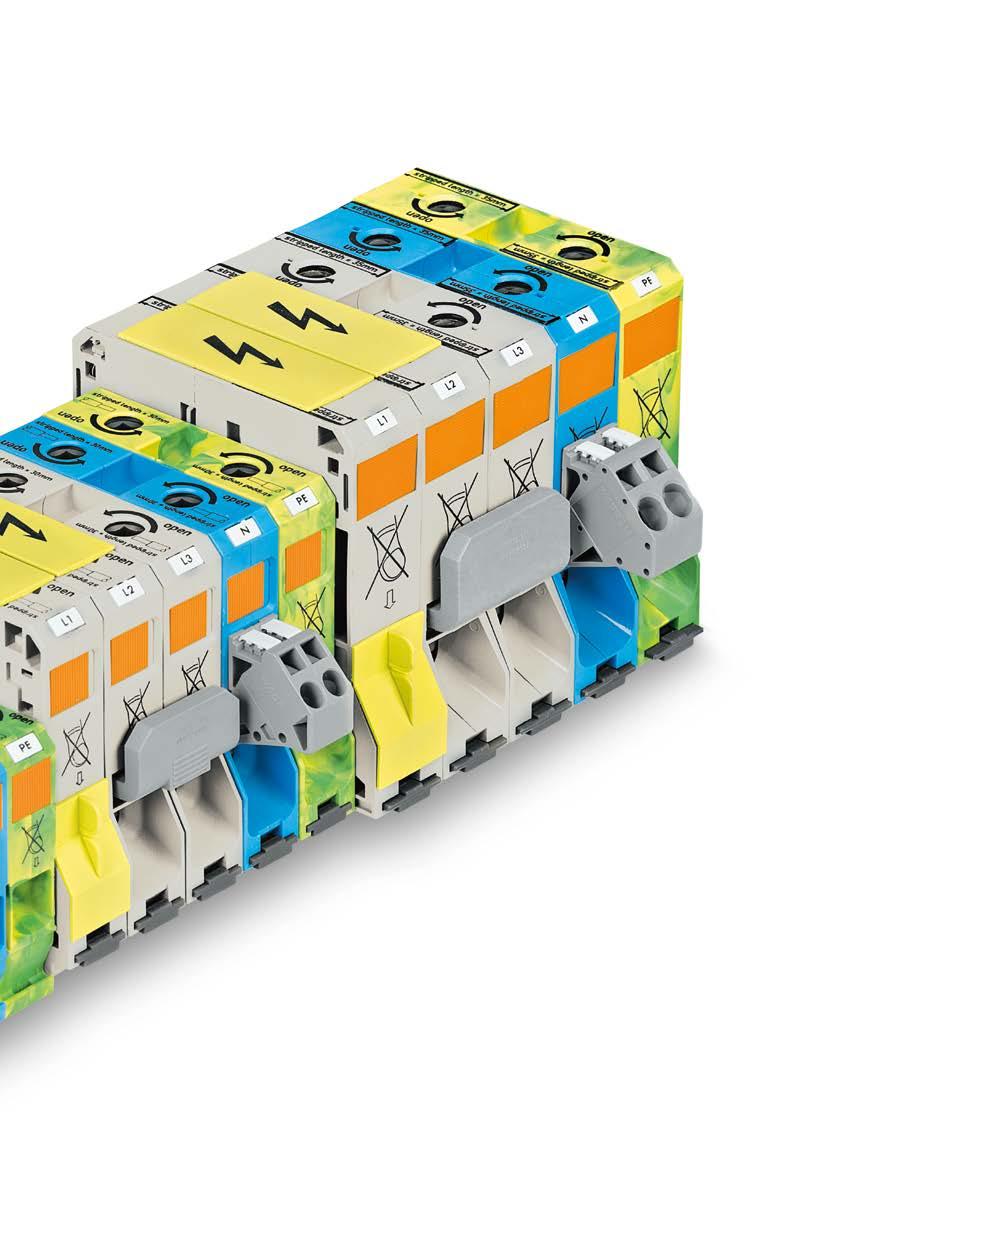 Perfect for Every Application The high-current terminal blocks meet the most stringent requirements, including those specified for railway and marine applications Resistant to heat and cold even